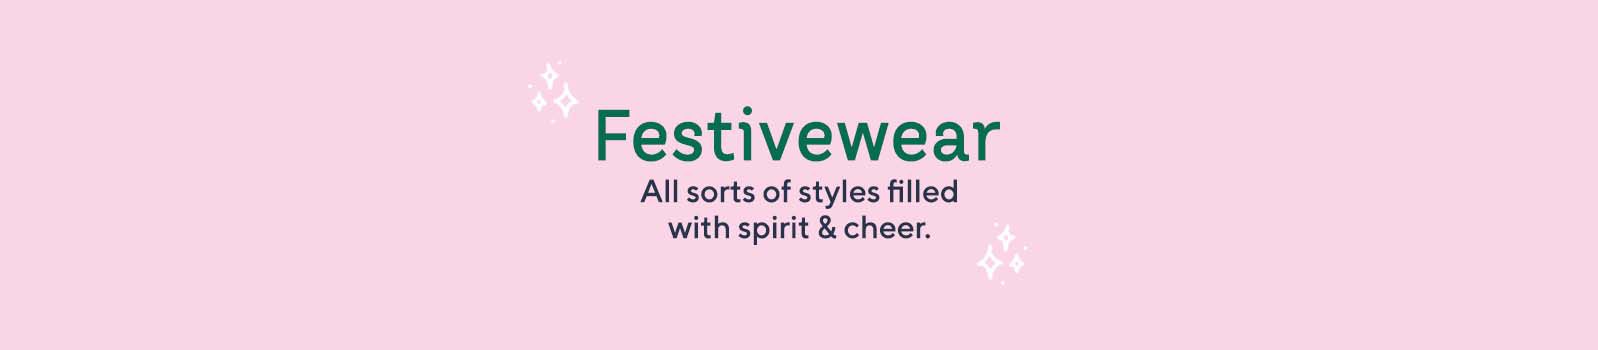 Festivewear  All sorts of styles filled with spirit & cheer